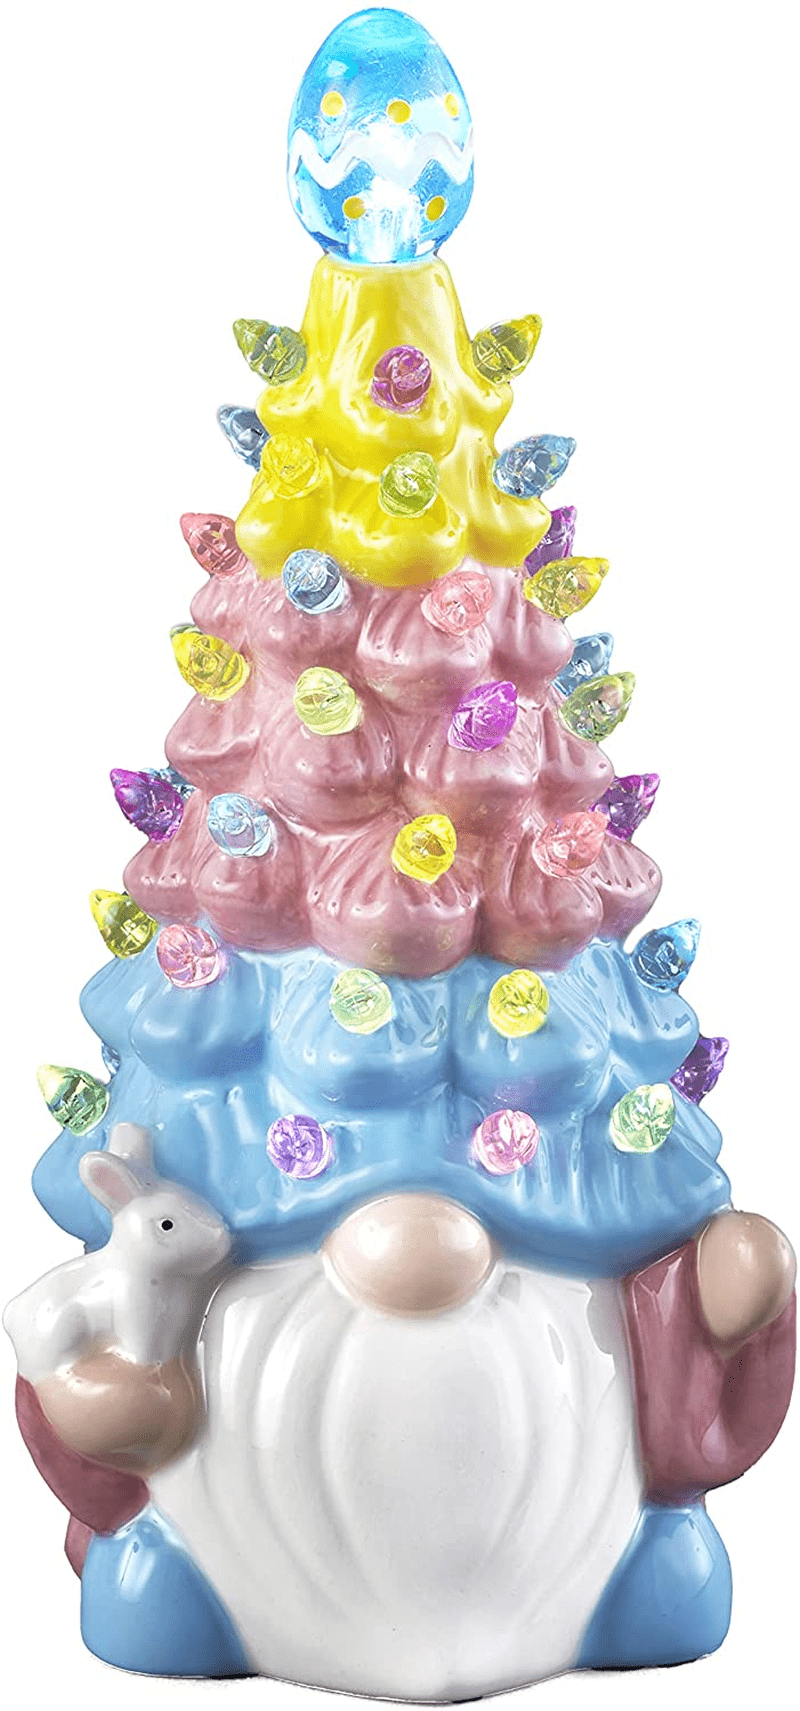 Ceramic Easter Tree - Gnome Figurine Decoration for Mantle or Table - Large